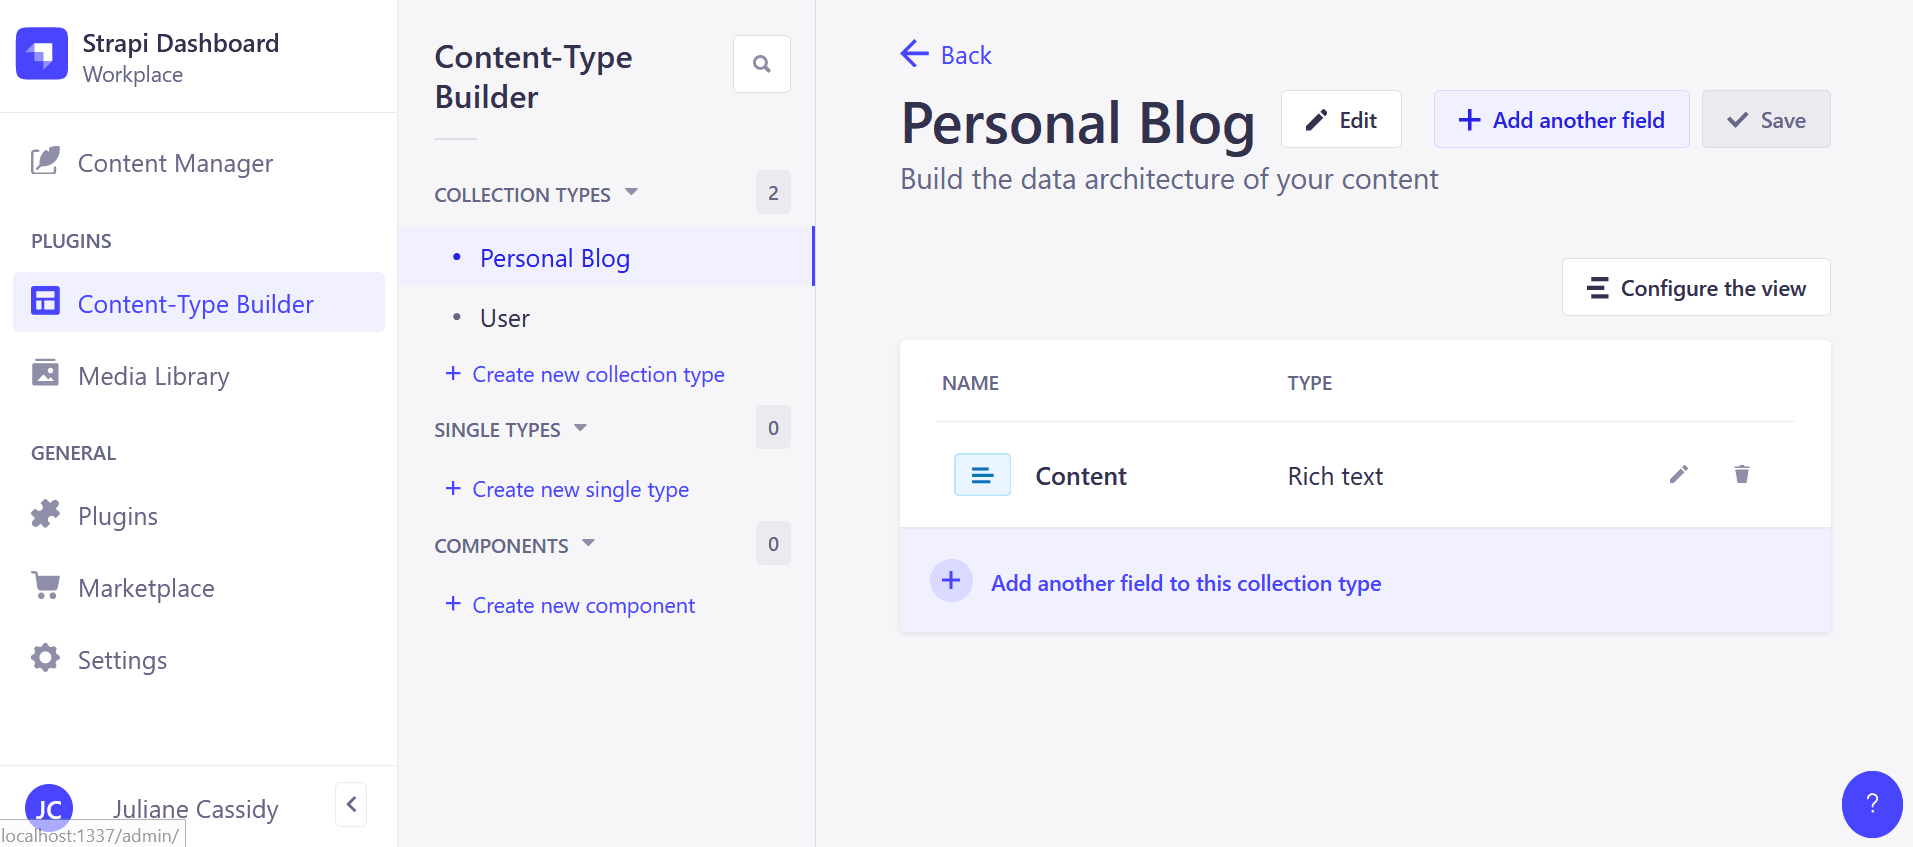 Strapi Content-Type Manager dashboard with a collection type called personal blog with one content component